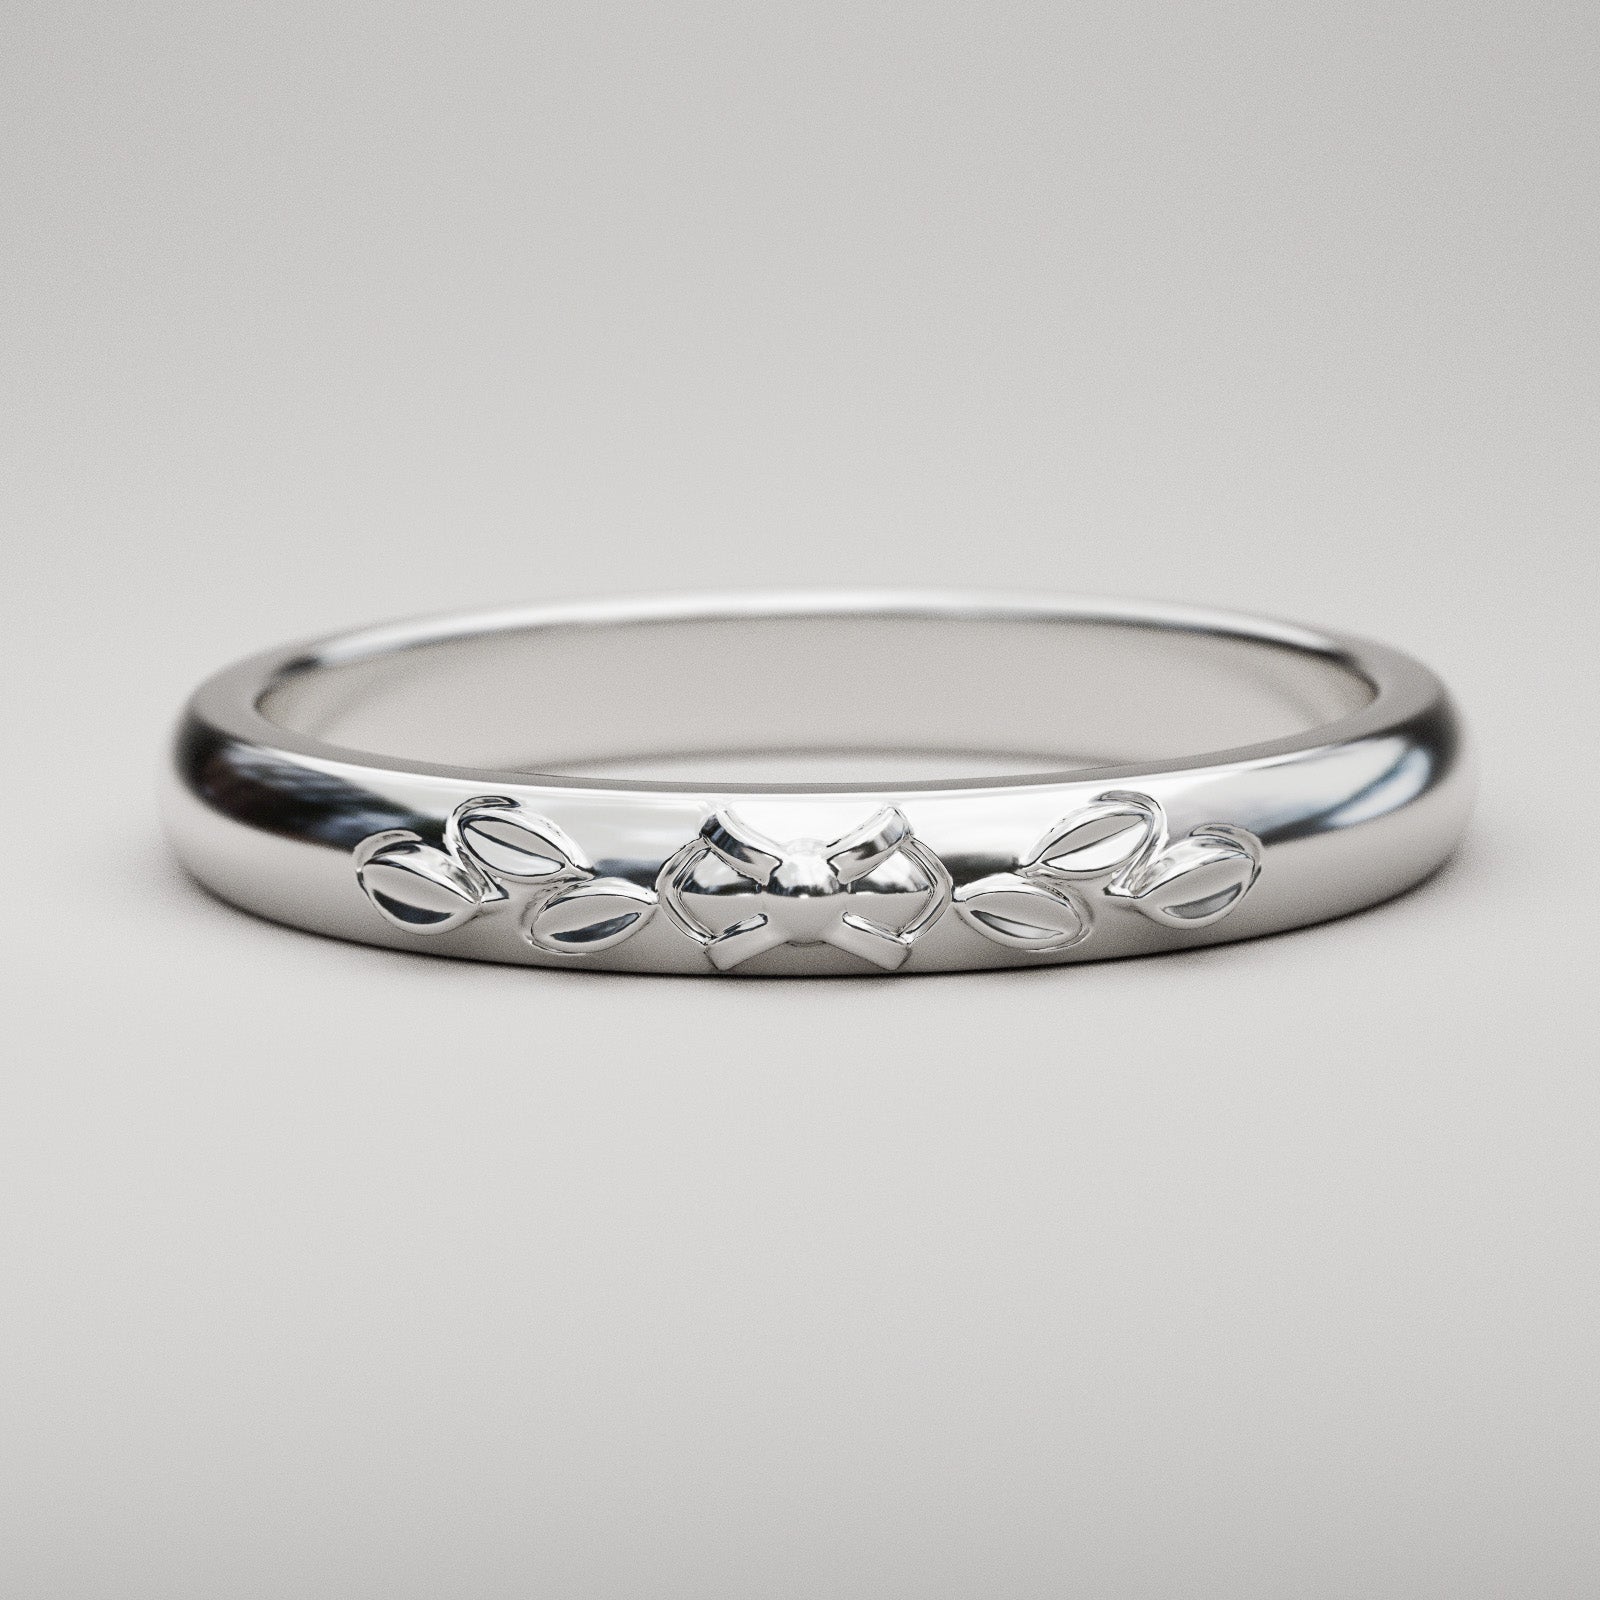 Leaf design wedding band with classic vintage styling for woman in white gold